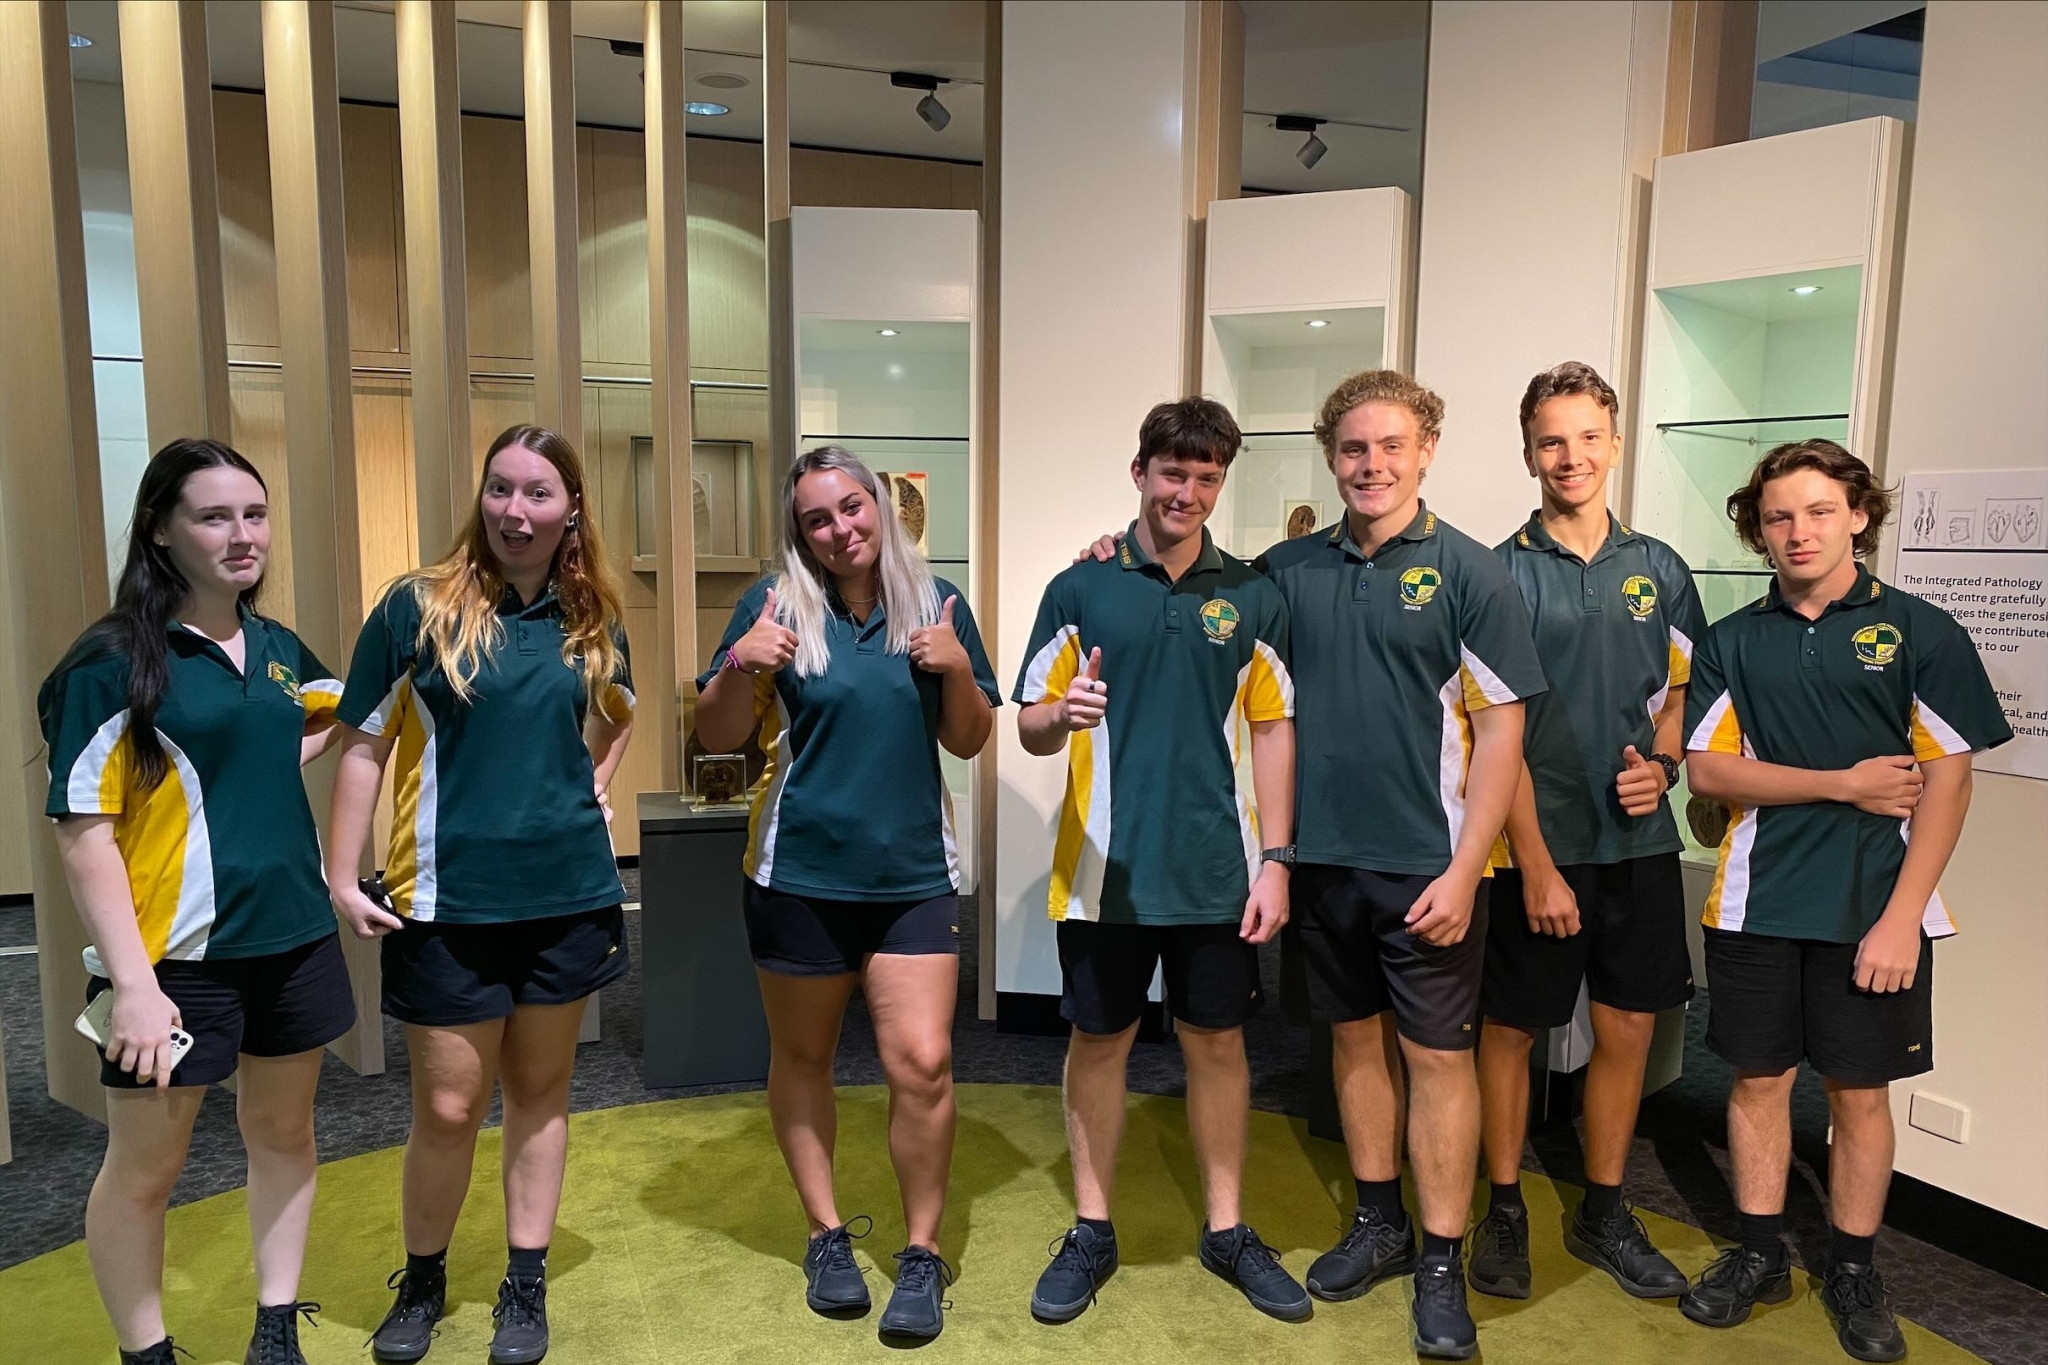 Toogoolawah State High School students Evie Lockwood, Ladia Flanders, Kate Hudson, Matthew Cumner, Isaac Green, Hunter Masters-Woods and Brandan Forster made the most of their excursion at the RBWH.